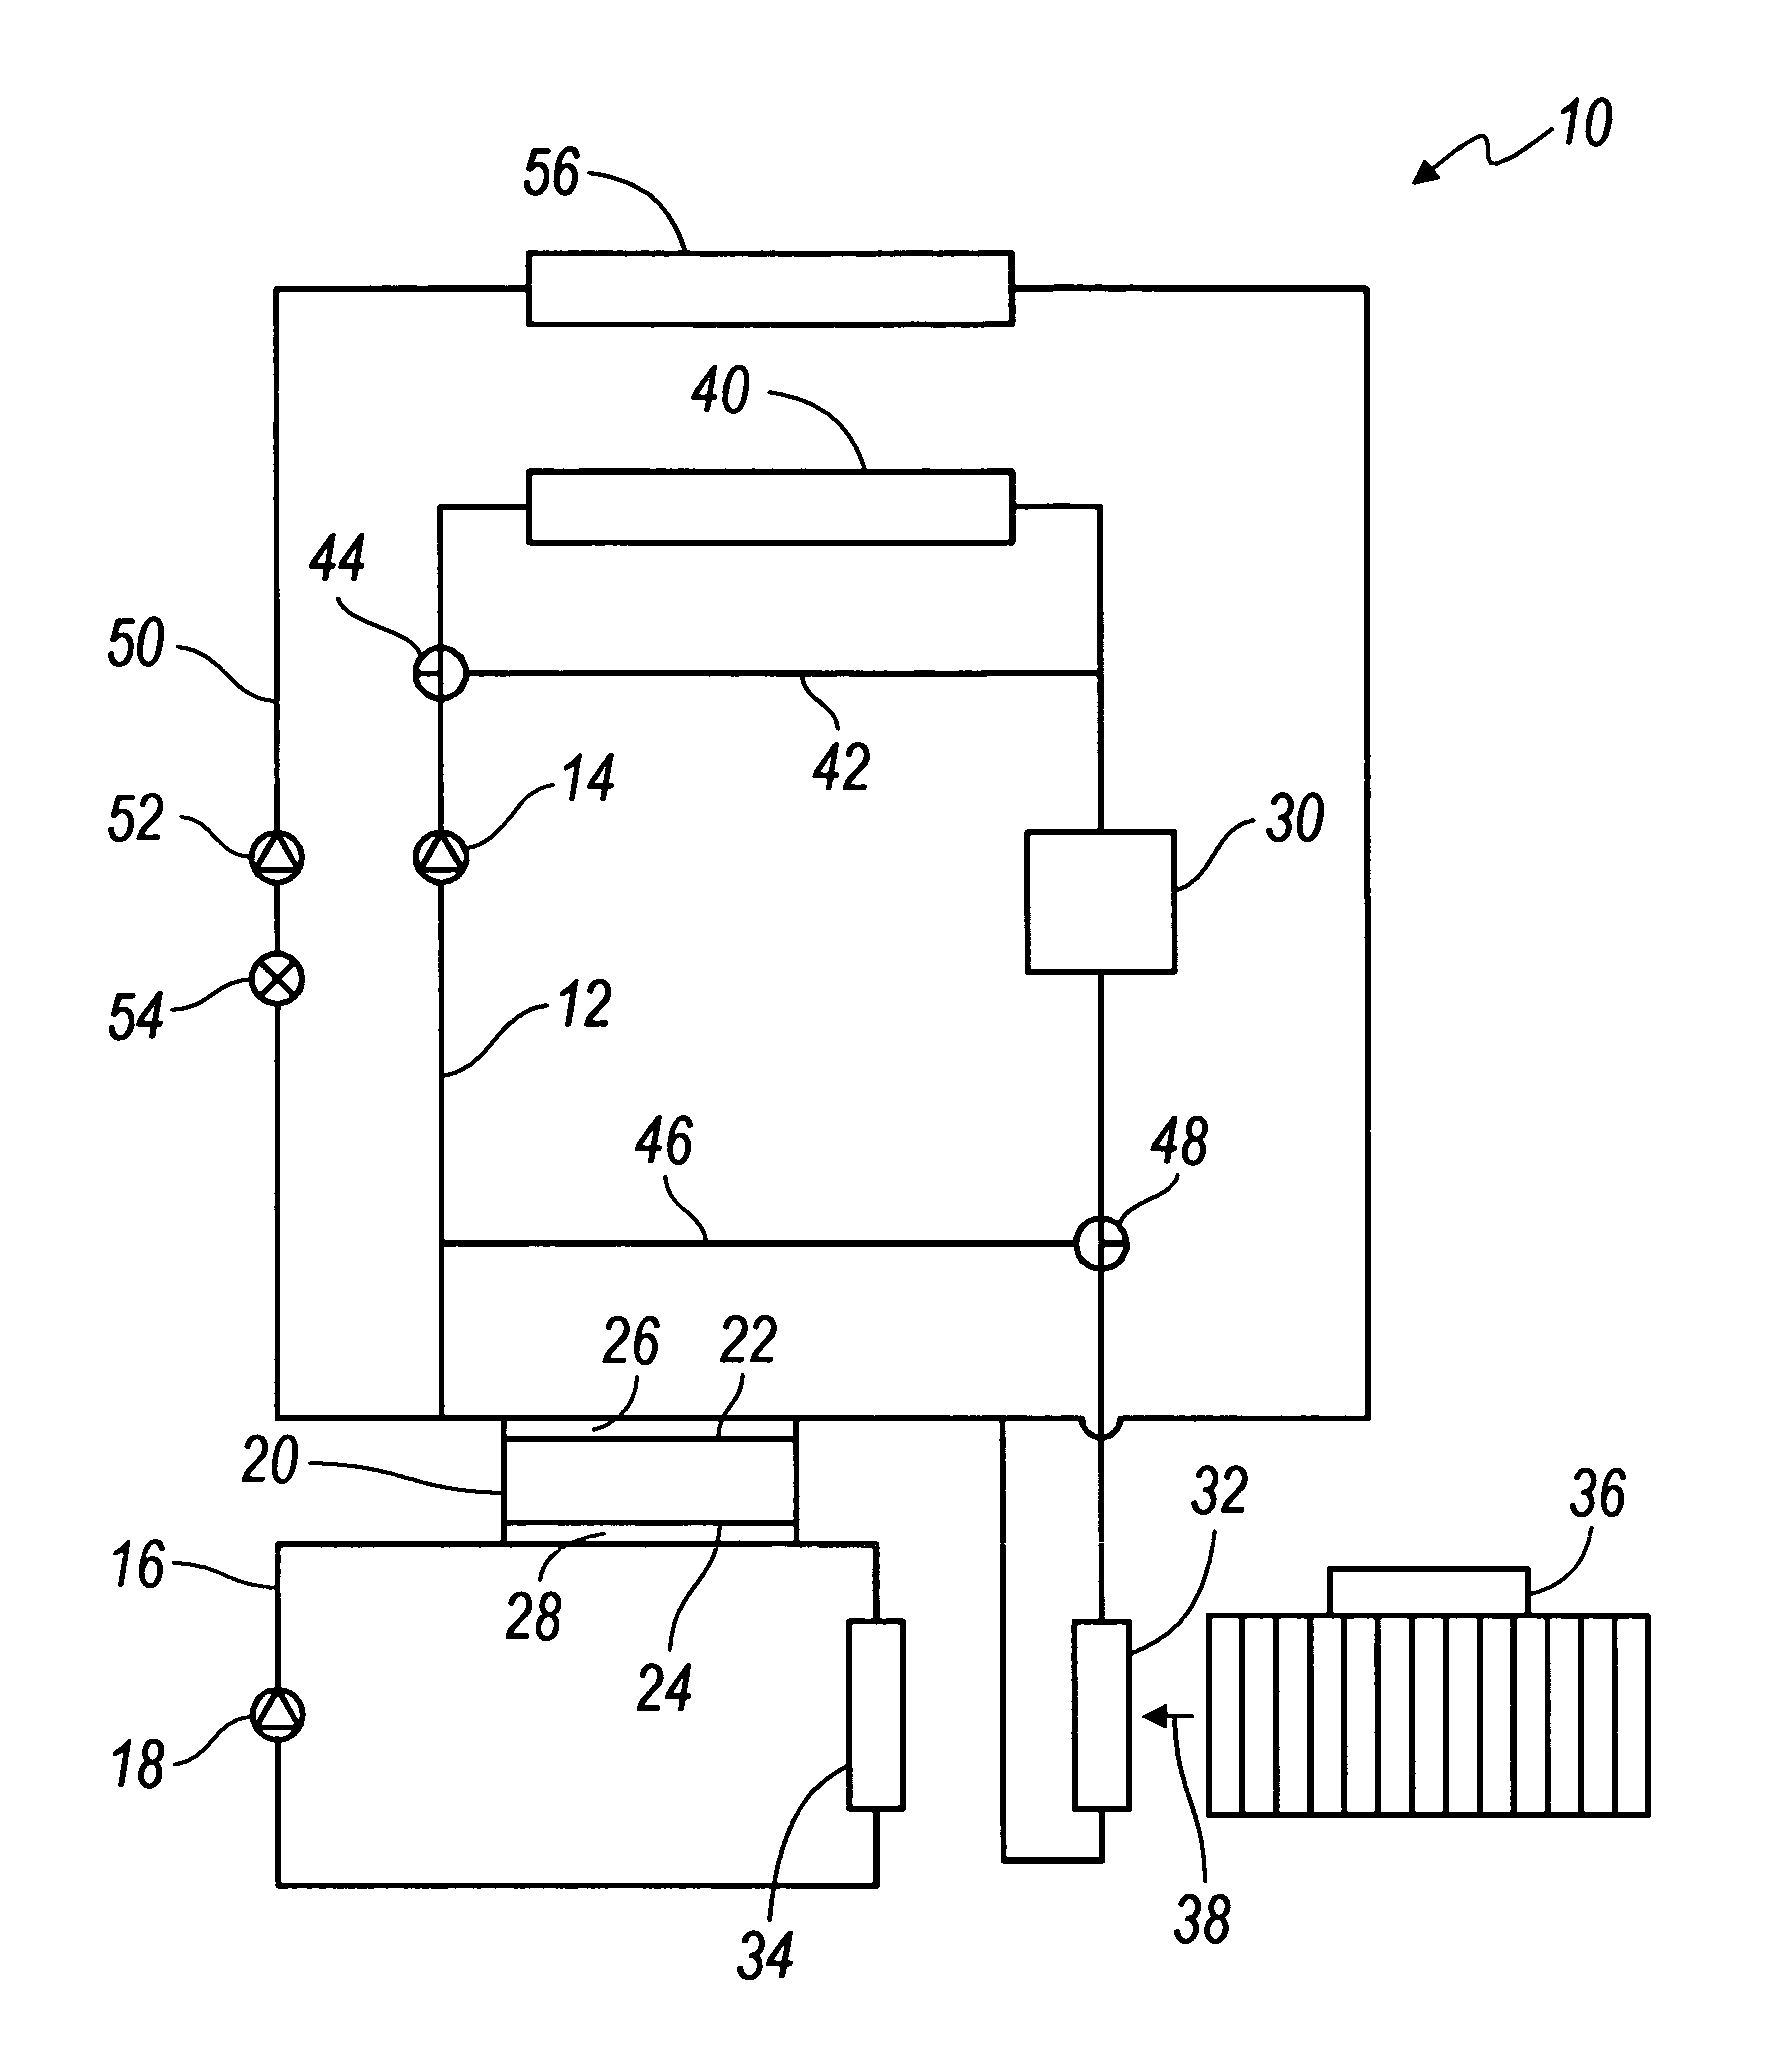 Thermoelectric-based heating and cooling system